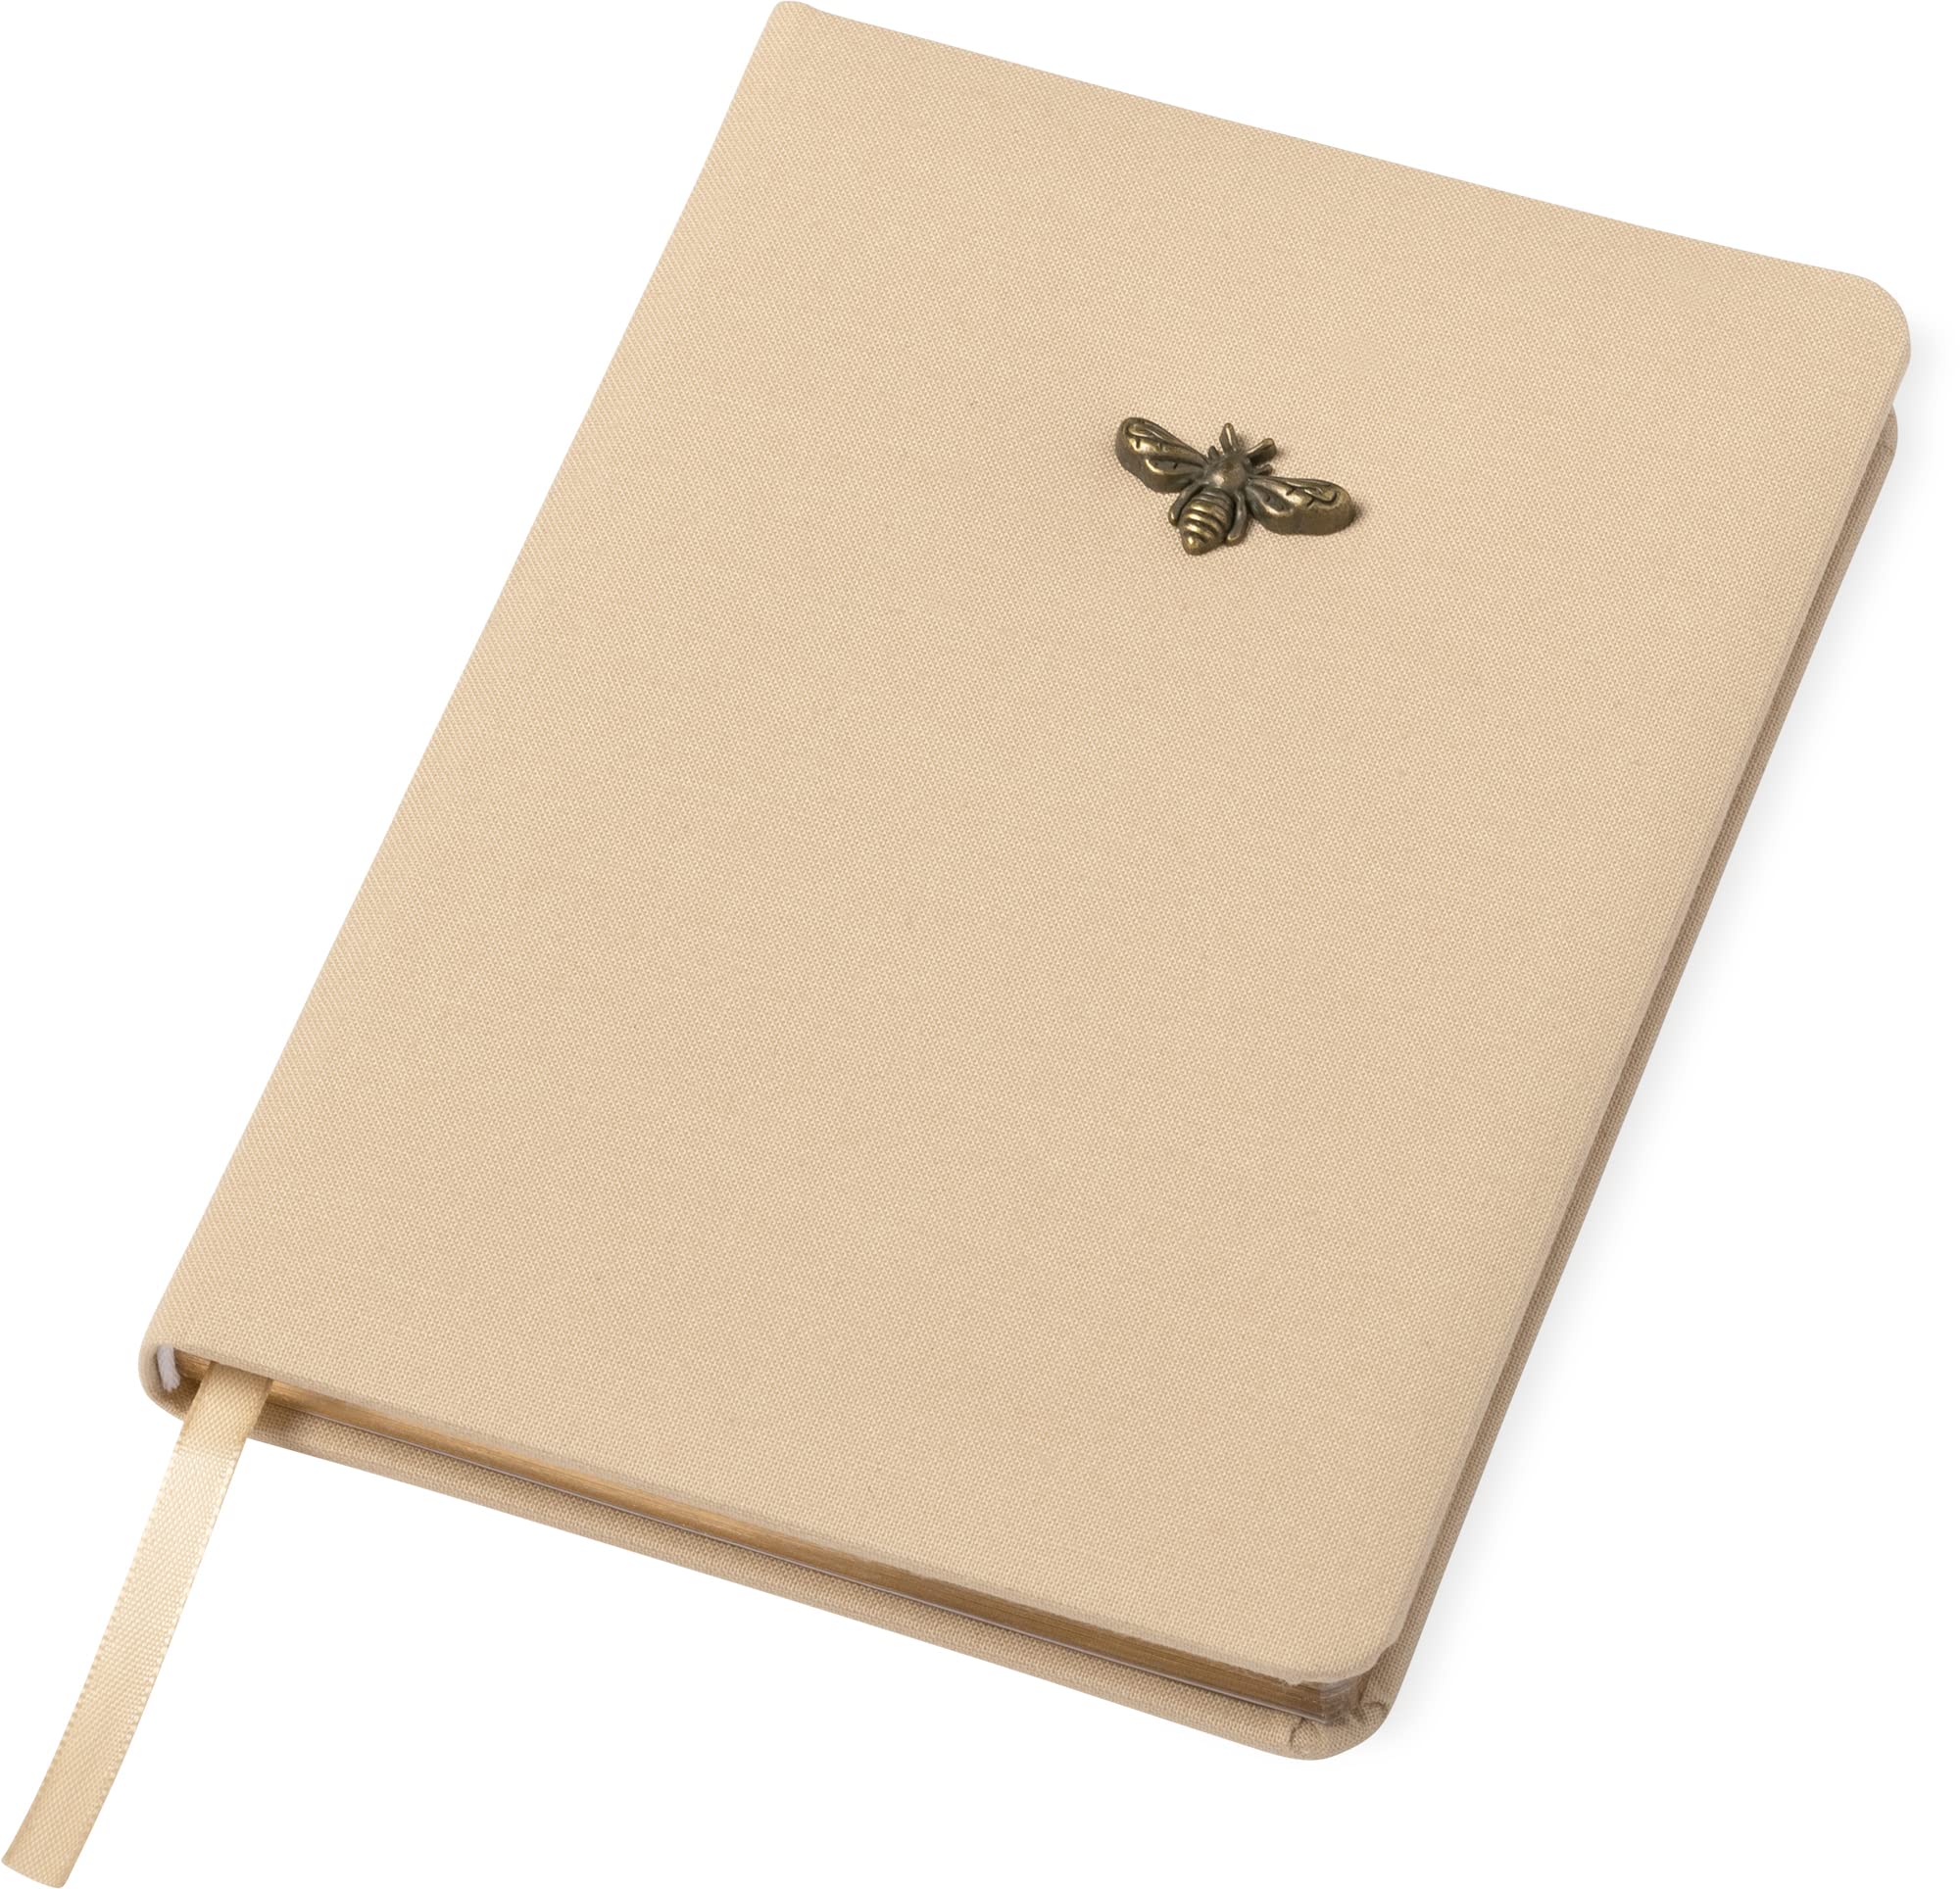 5-x-7-inch Eccolo Sand Bee Notebook